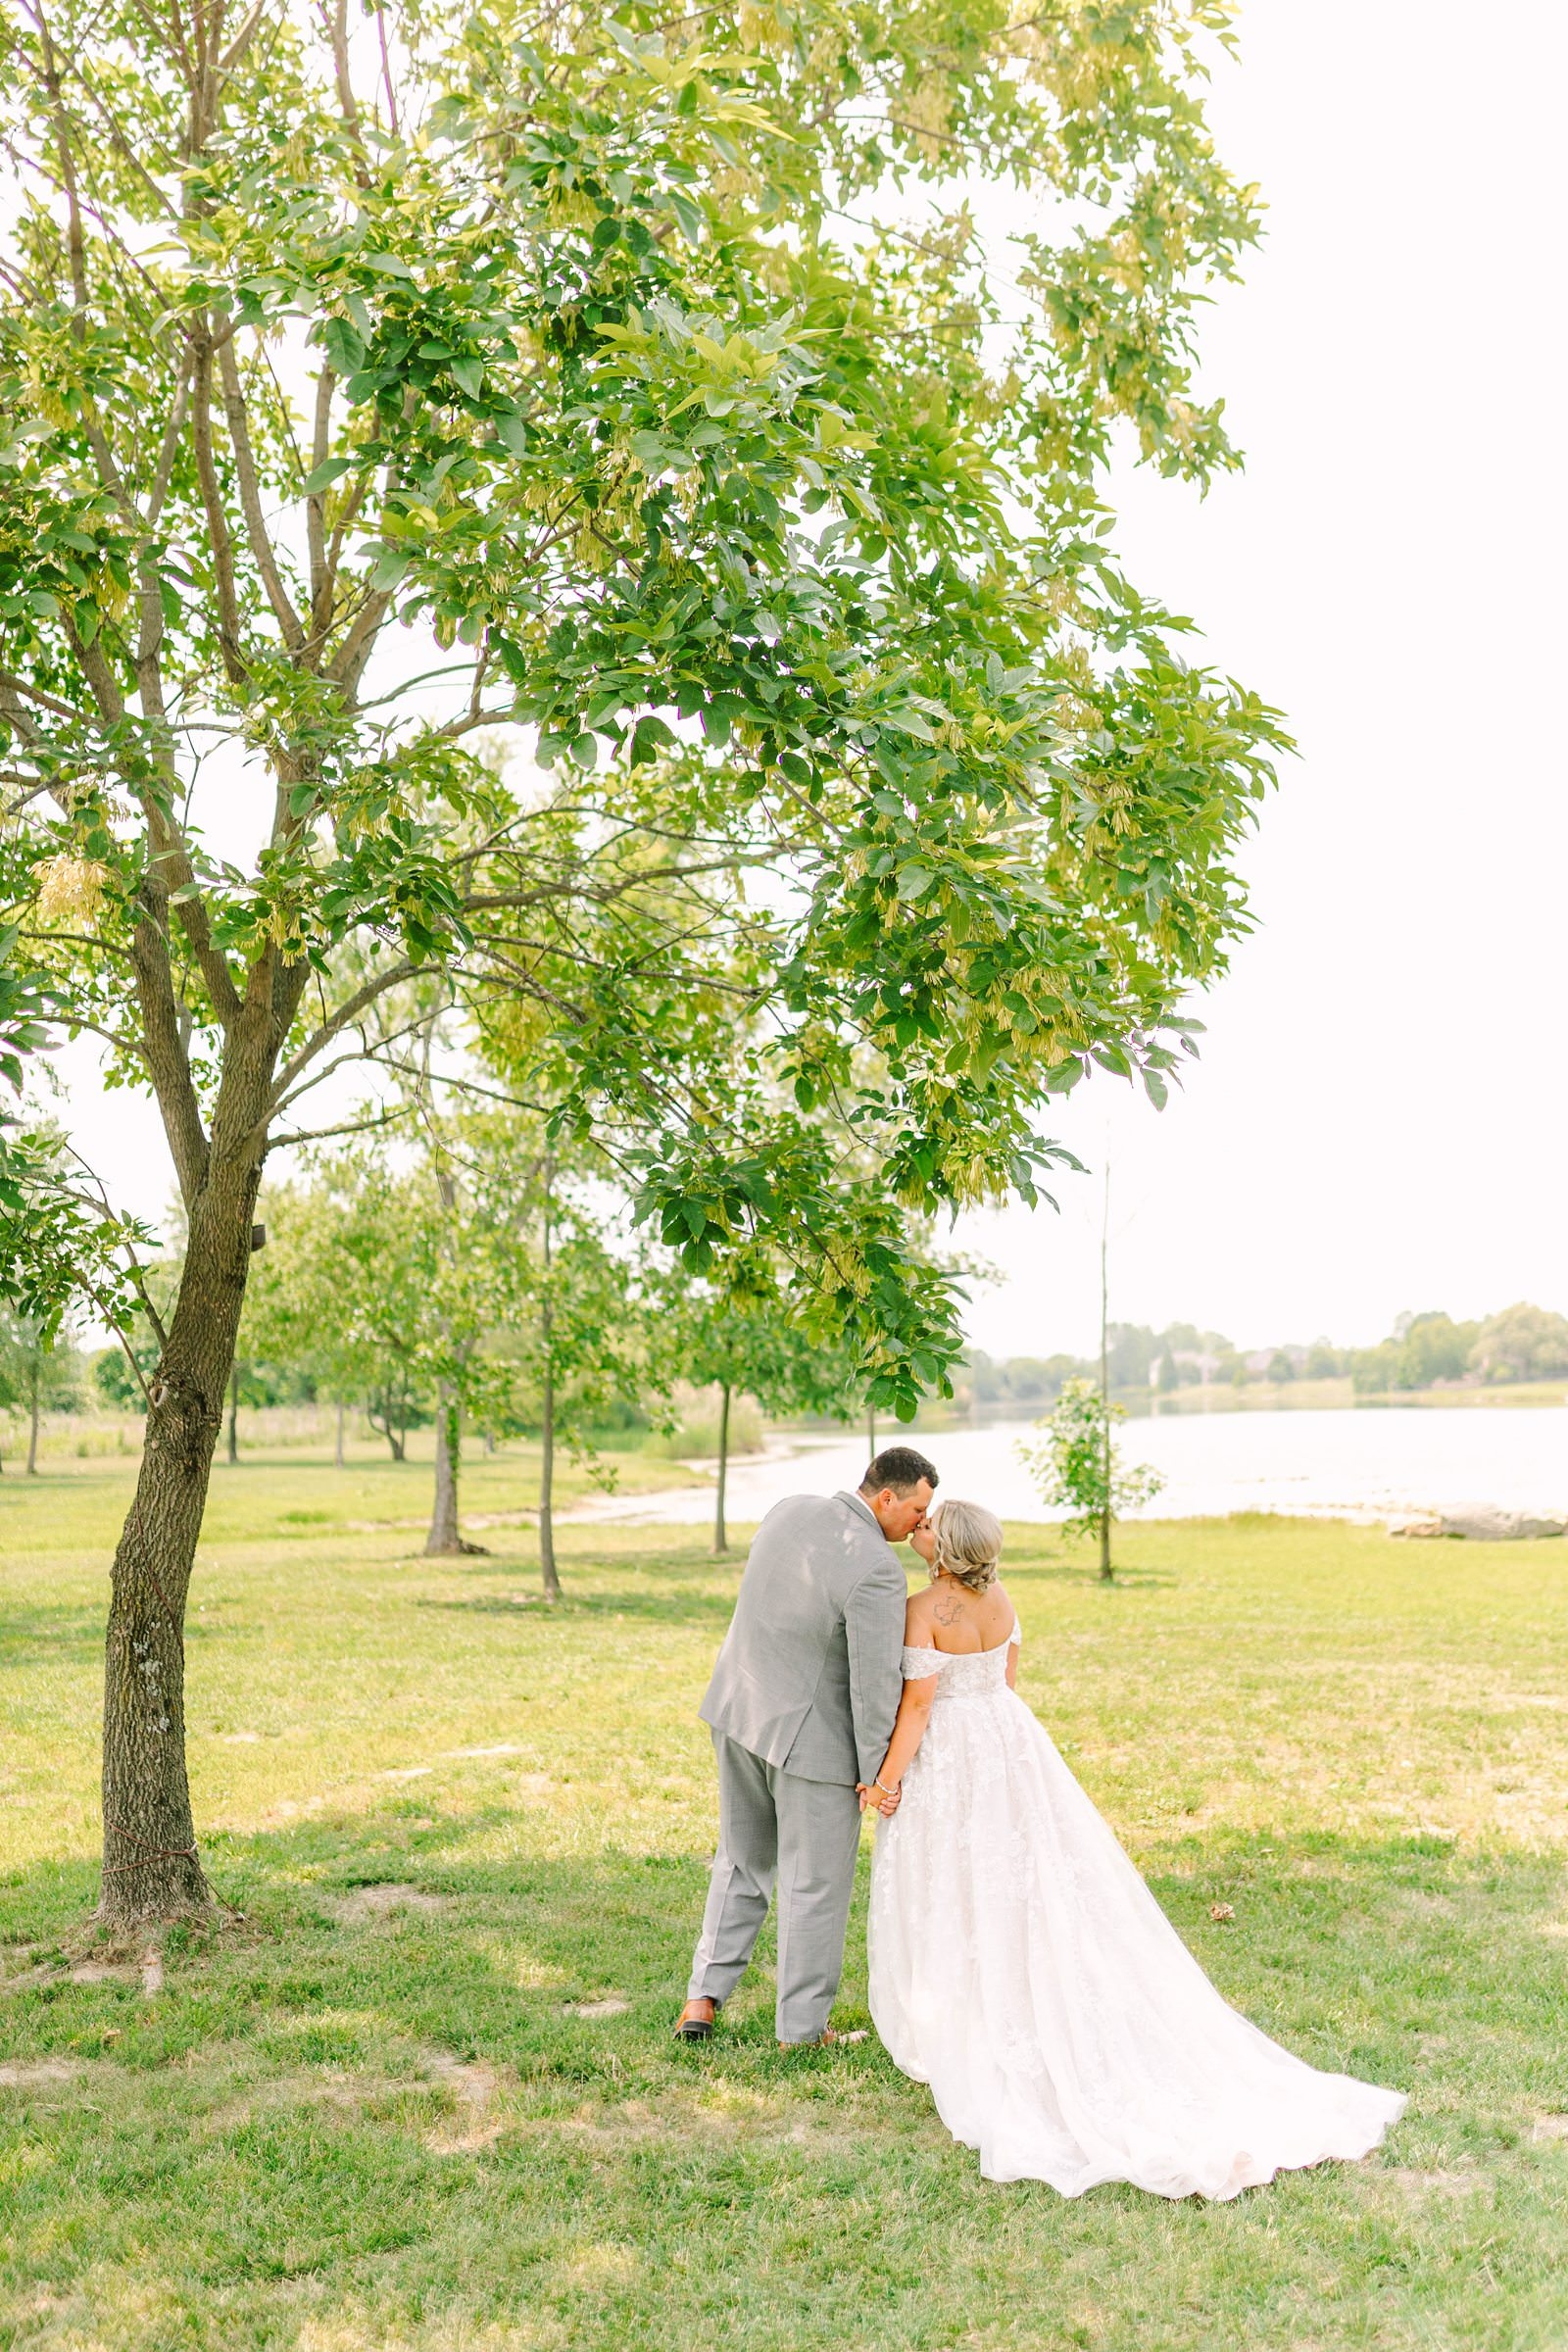 A Sunny Summer Wedding at Friedman Park in Newburgh Indiana | Paige and Dylan | Bret and Brandie Photography085.jpg